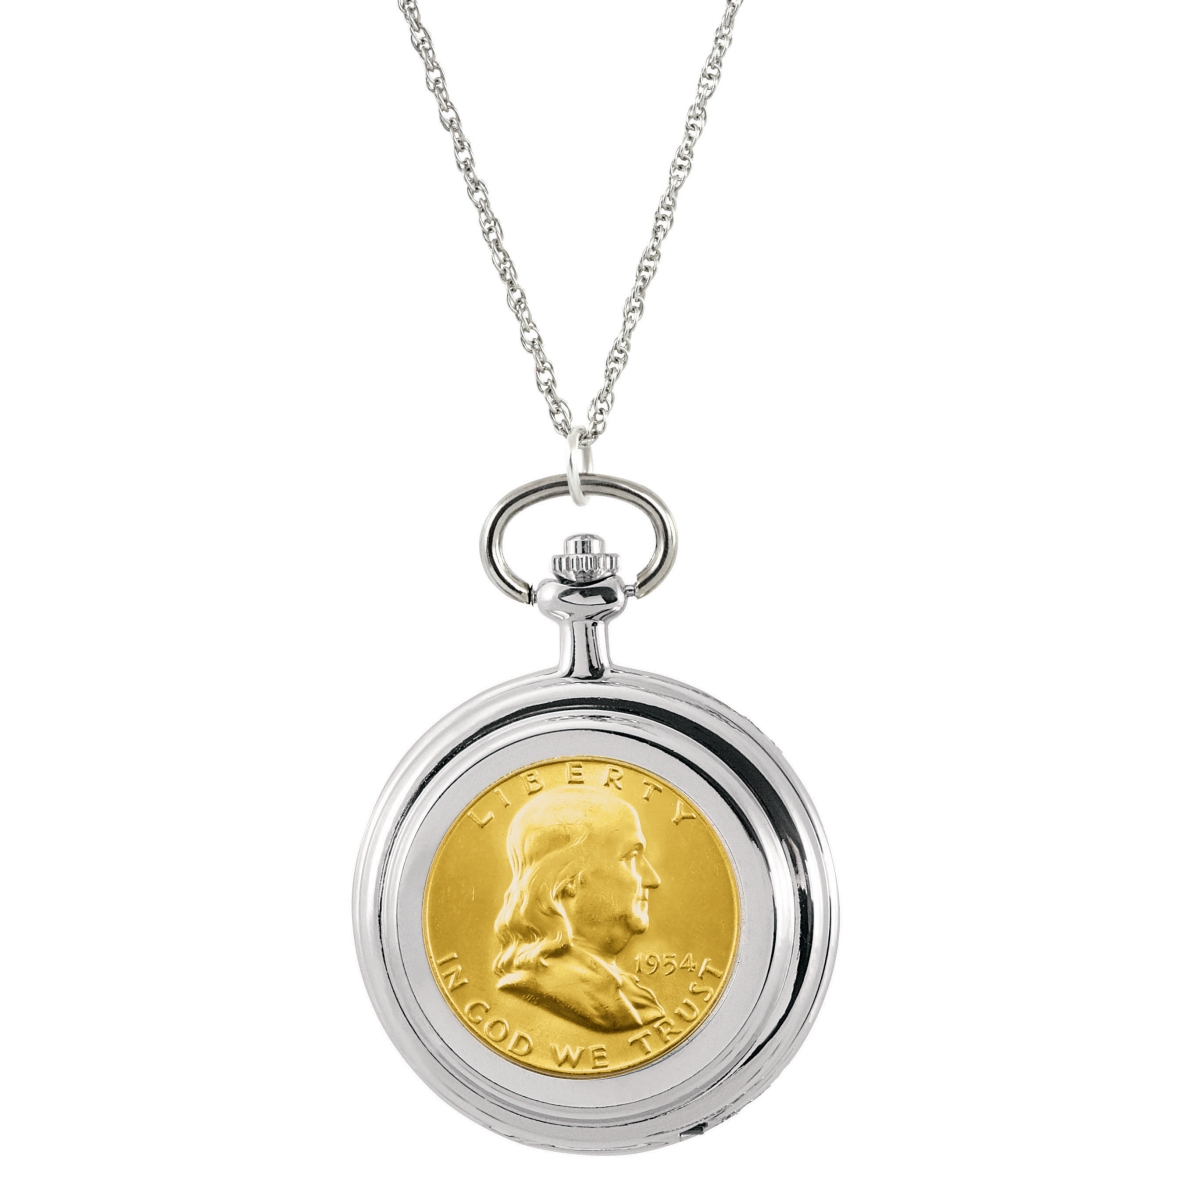 UPM GLOBAL 14194 Gold-Layered Silver Franklin Half Dollar Coin Pocket Watch Coin Pendant Necklace